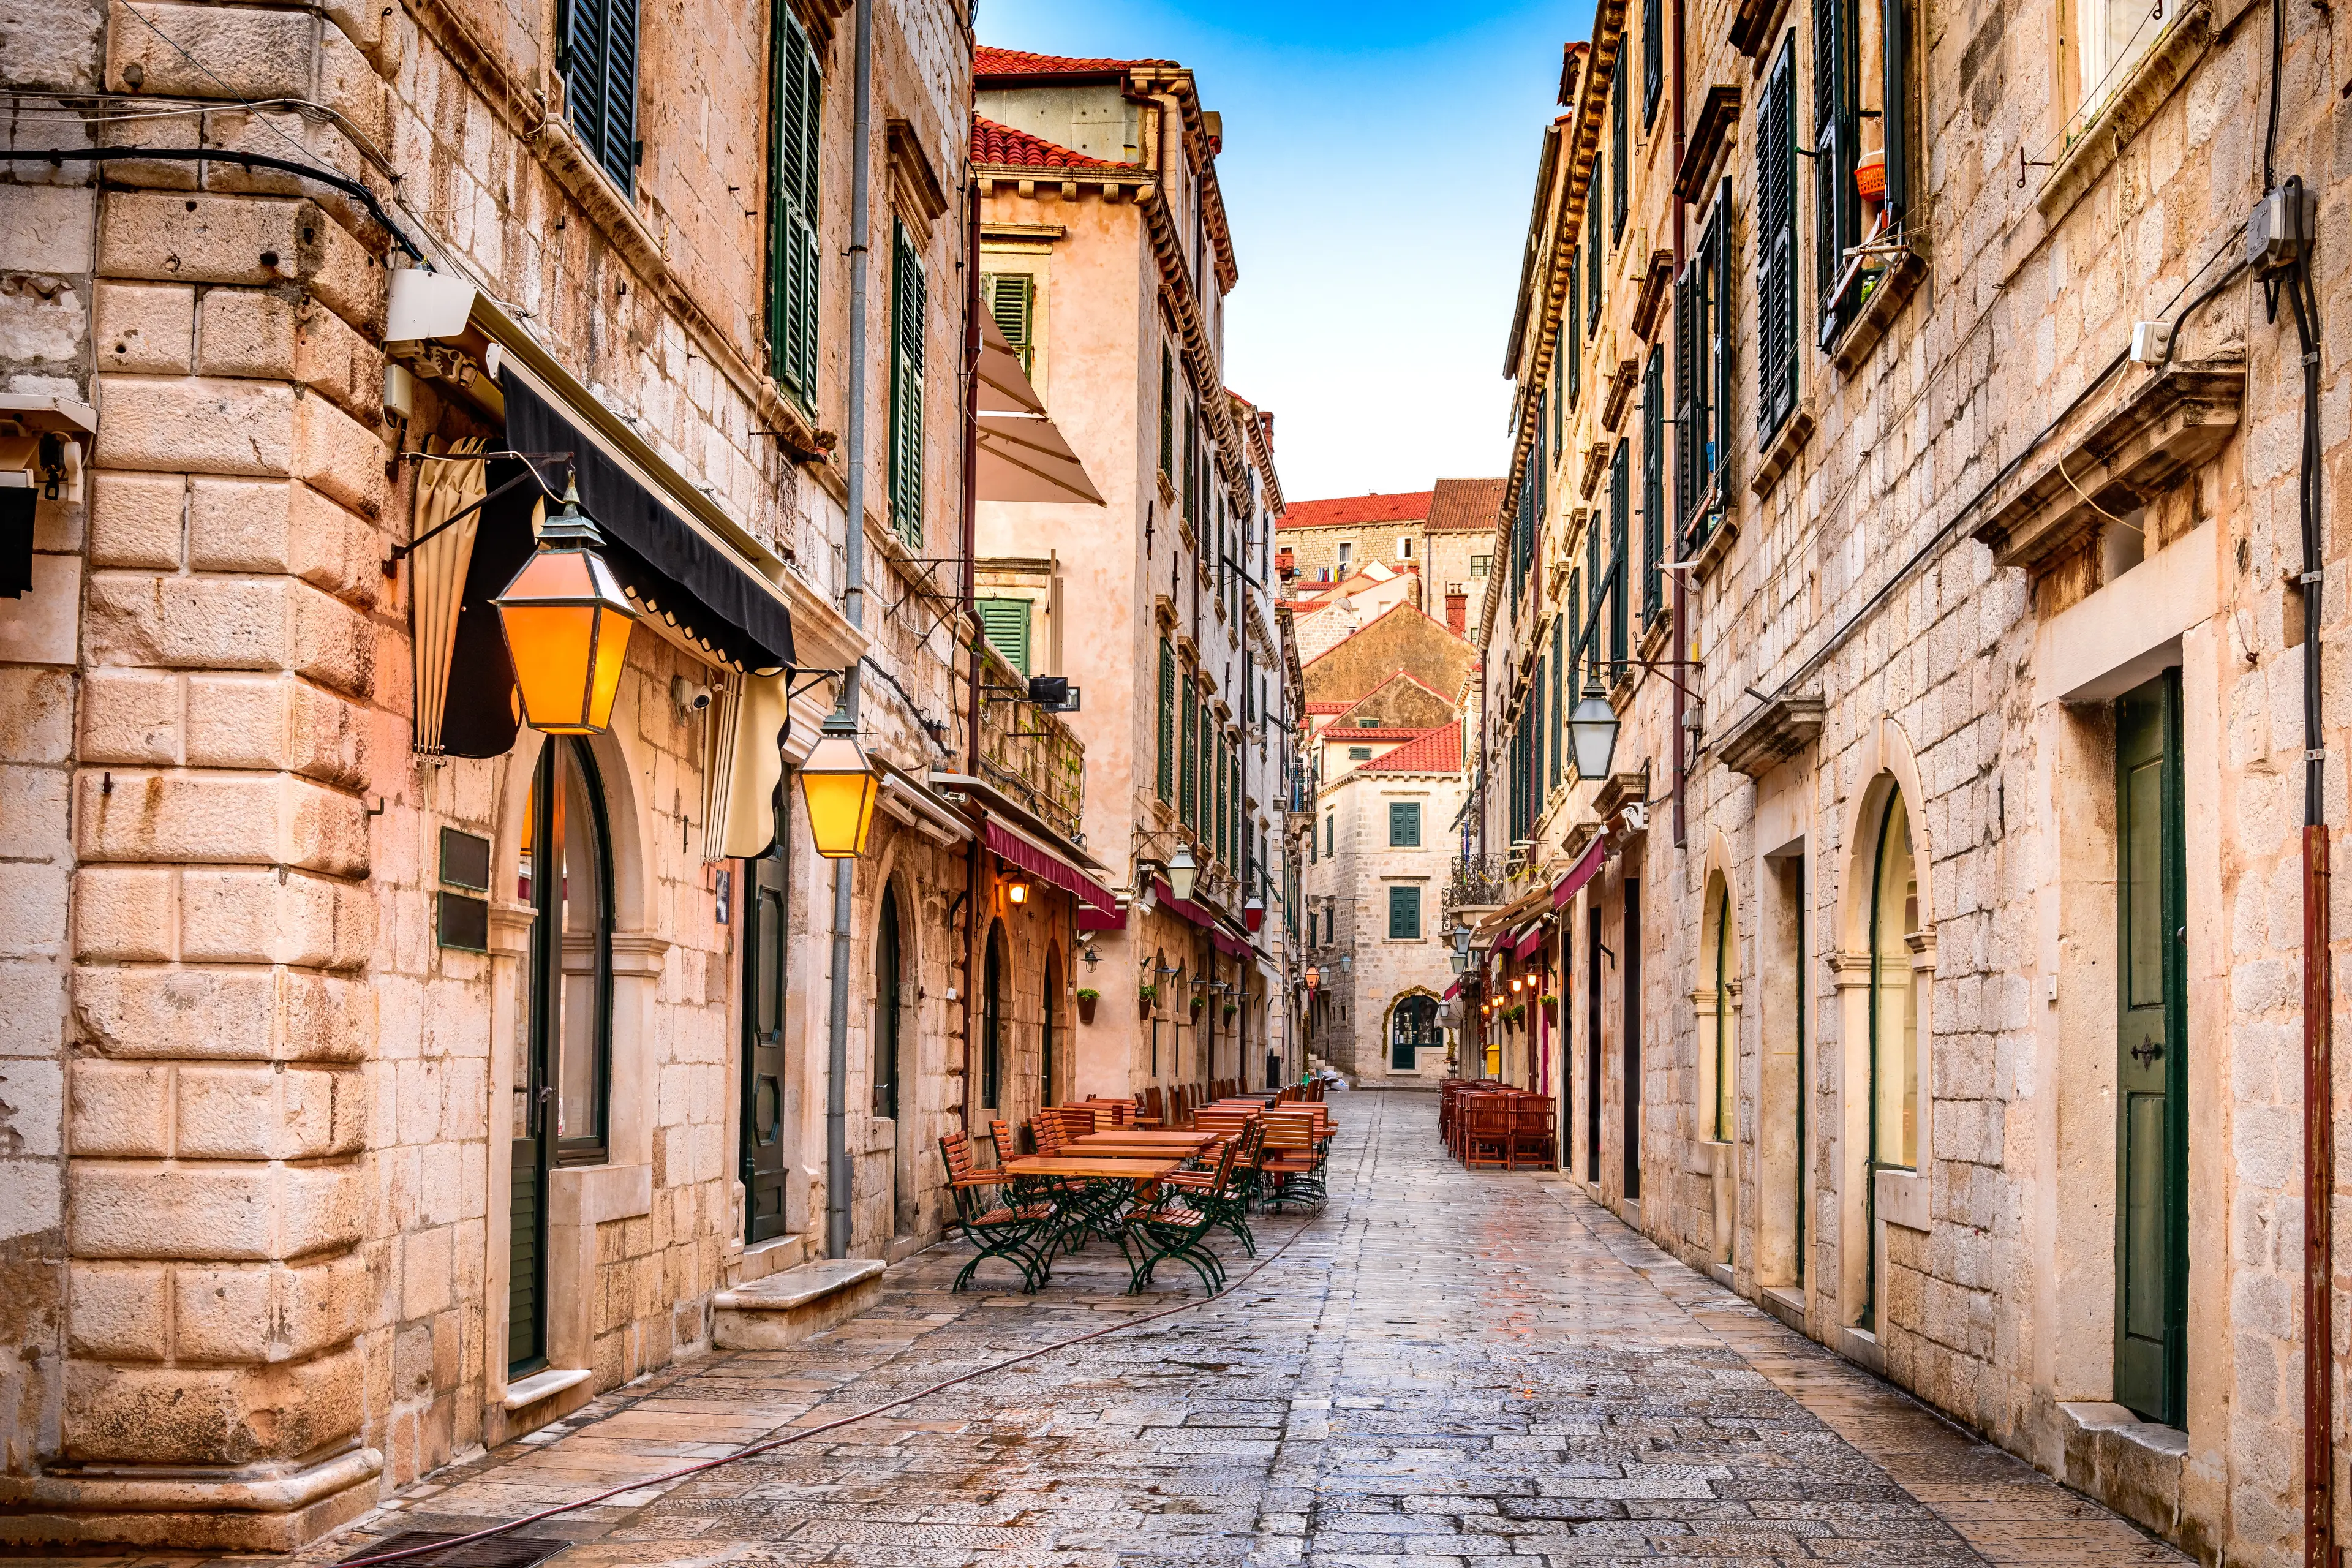 2-Day Local Experience in Dubrovnik: Nightlife and Shopping with Friends